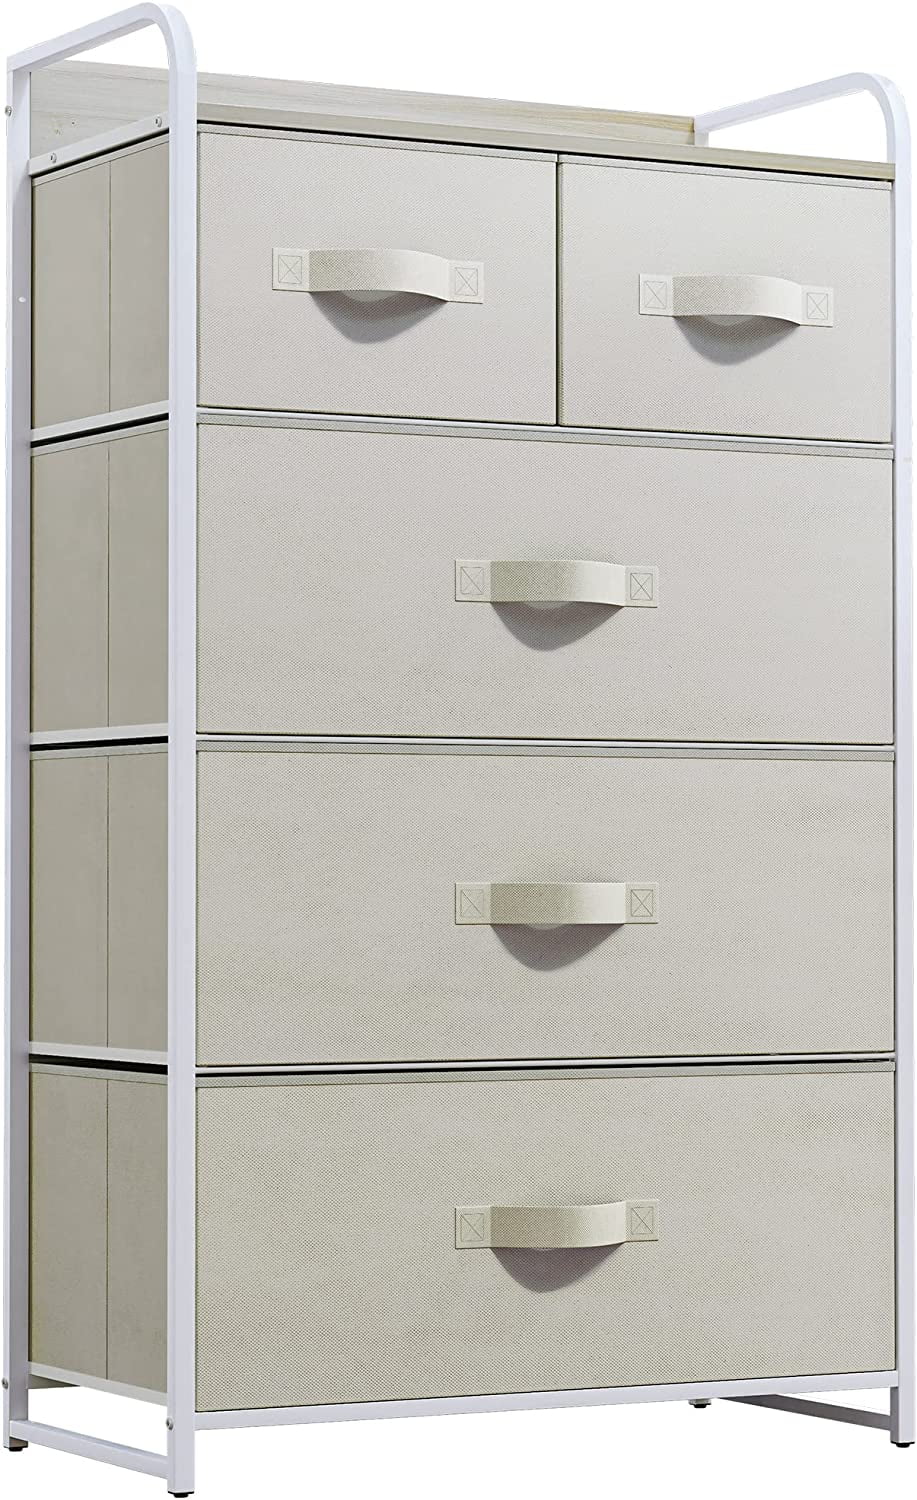 Gymax 23.5 in. W x 15.5 in. D x 38 in. H 4 Drawer Dresser Tall Wide Storage  Organizer Unit w/Wooden Top Fabric Bins GYM09672 - The Home Depot